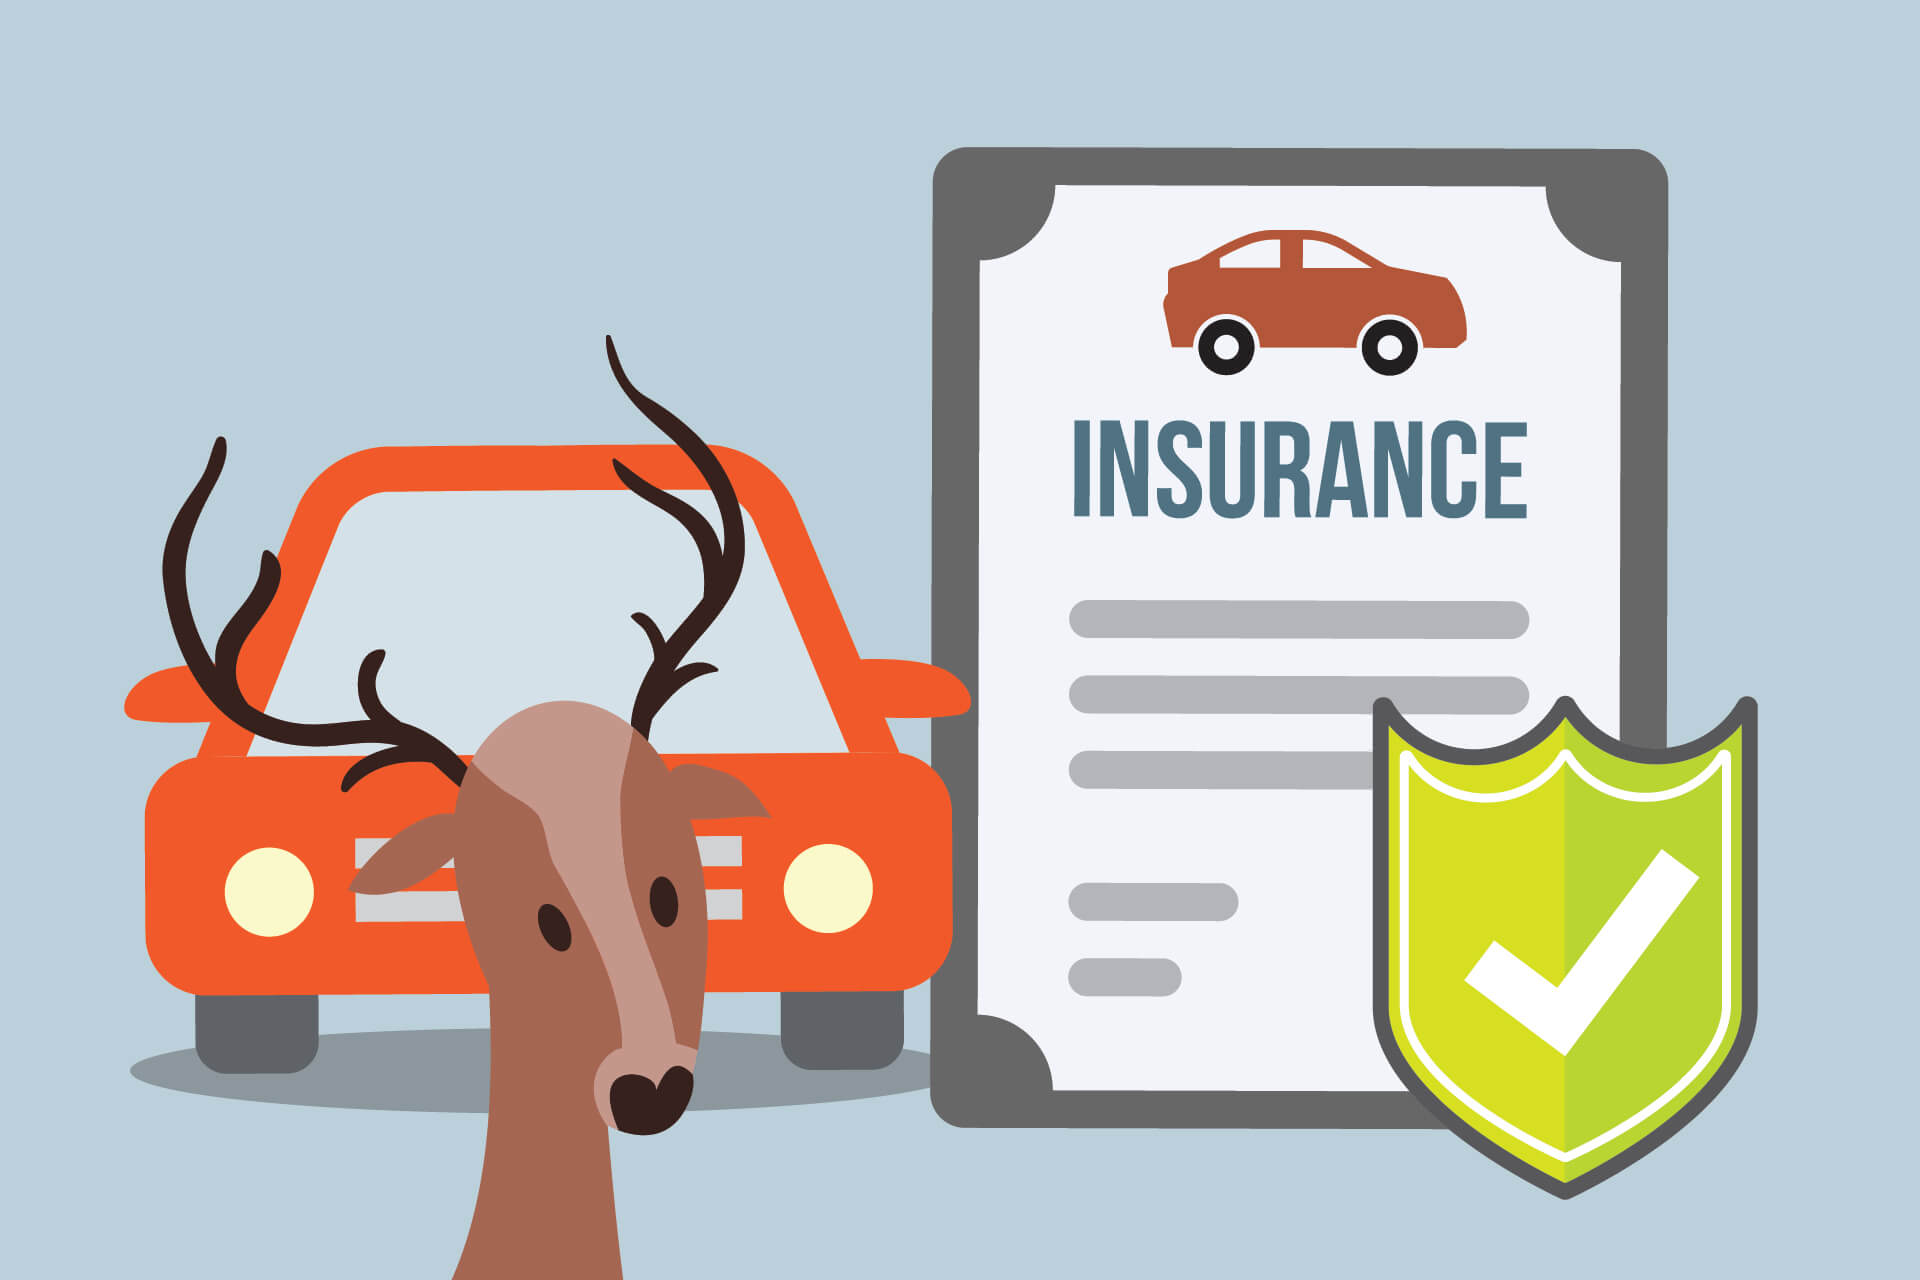 Auto insurance coverage for hitting deer free image download